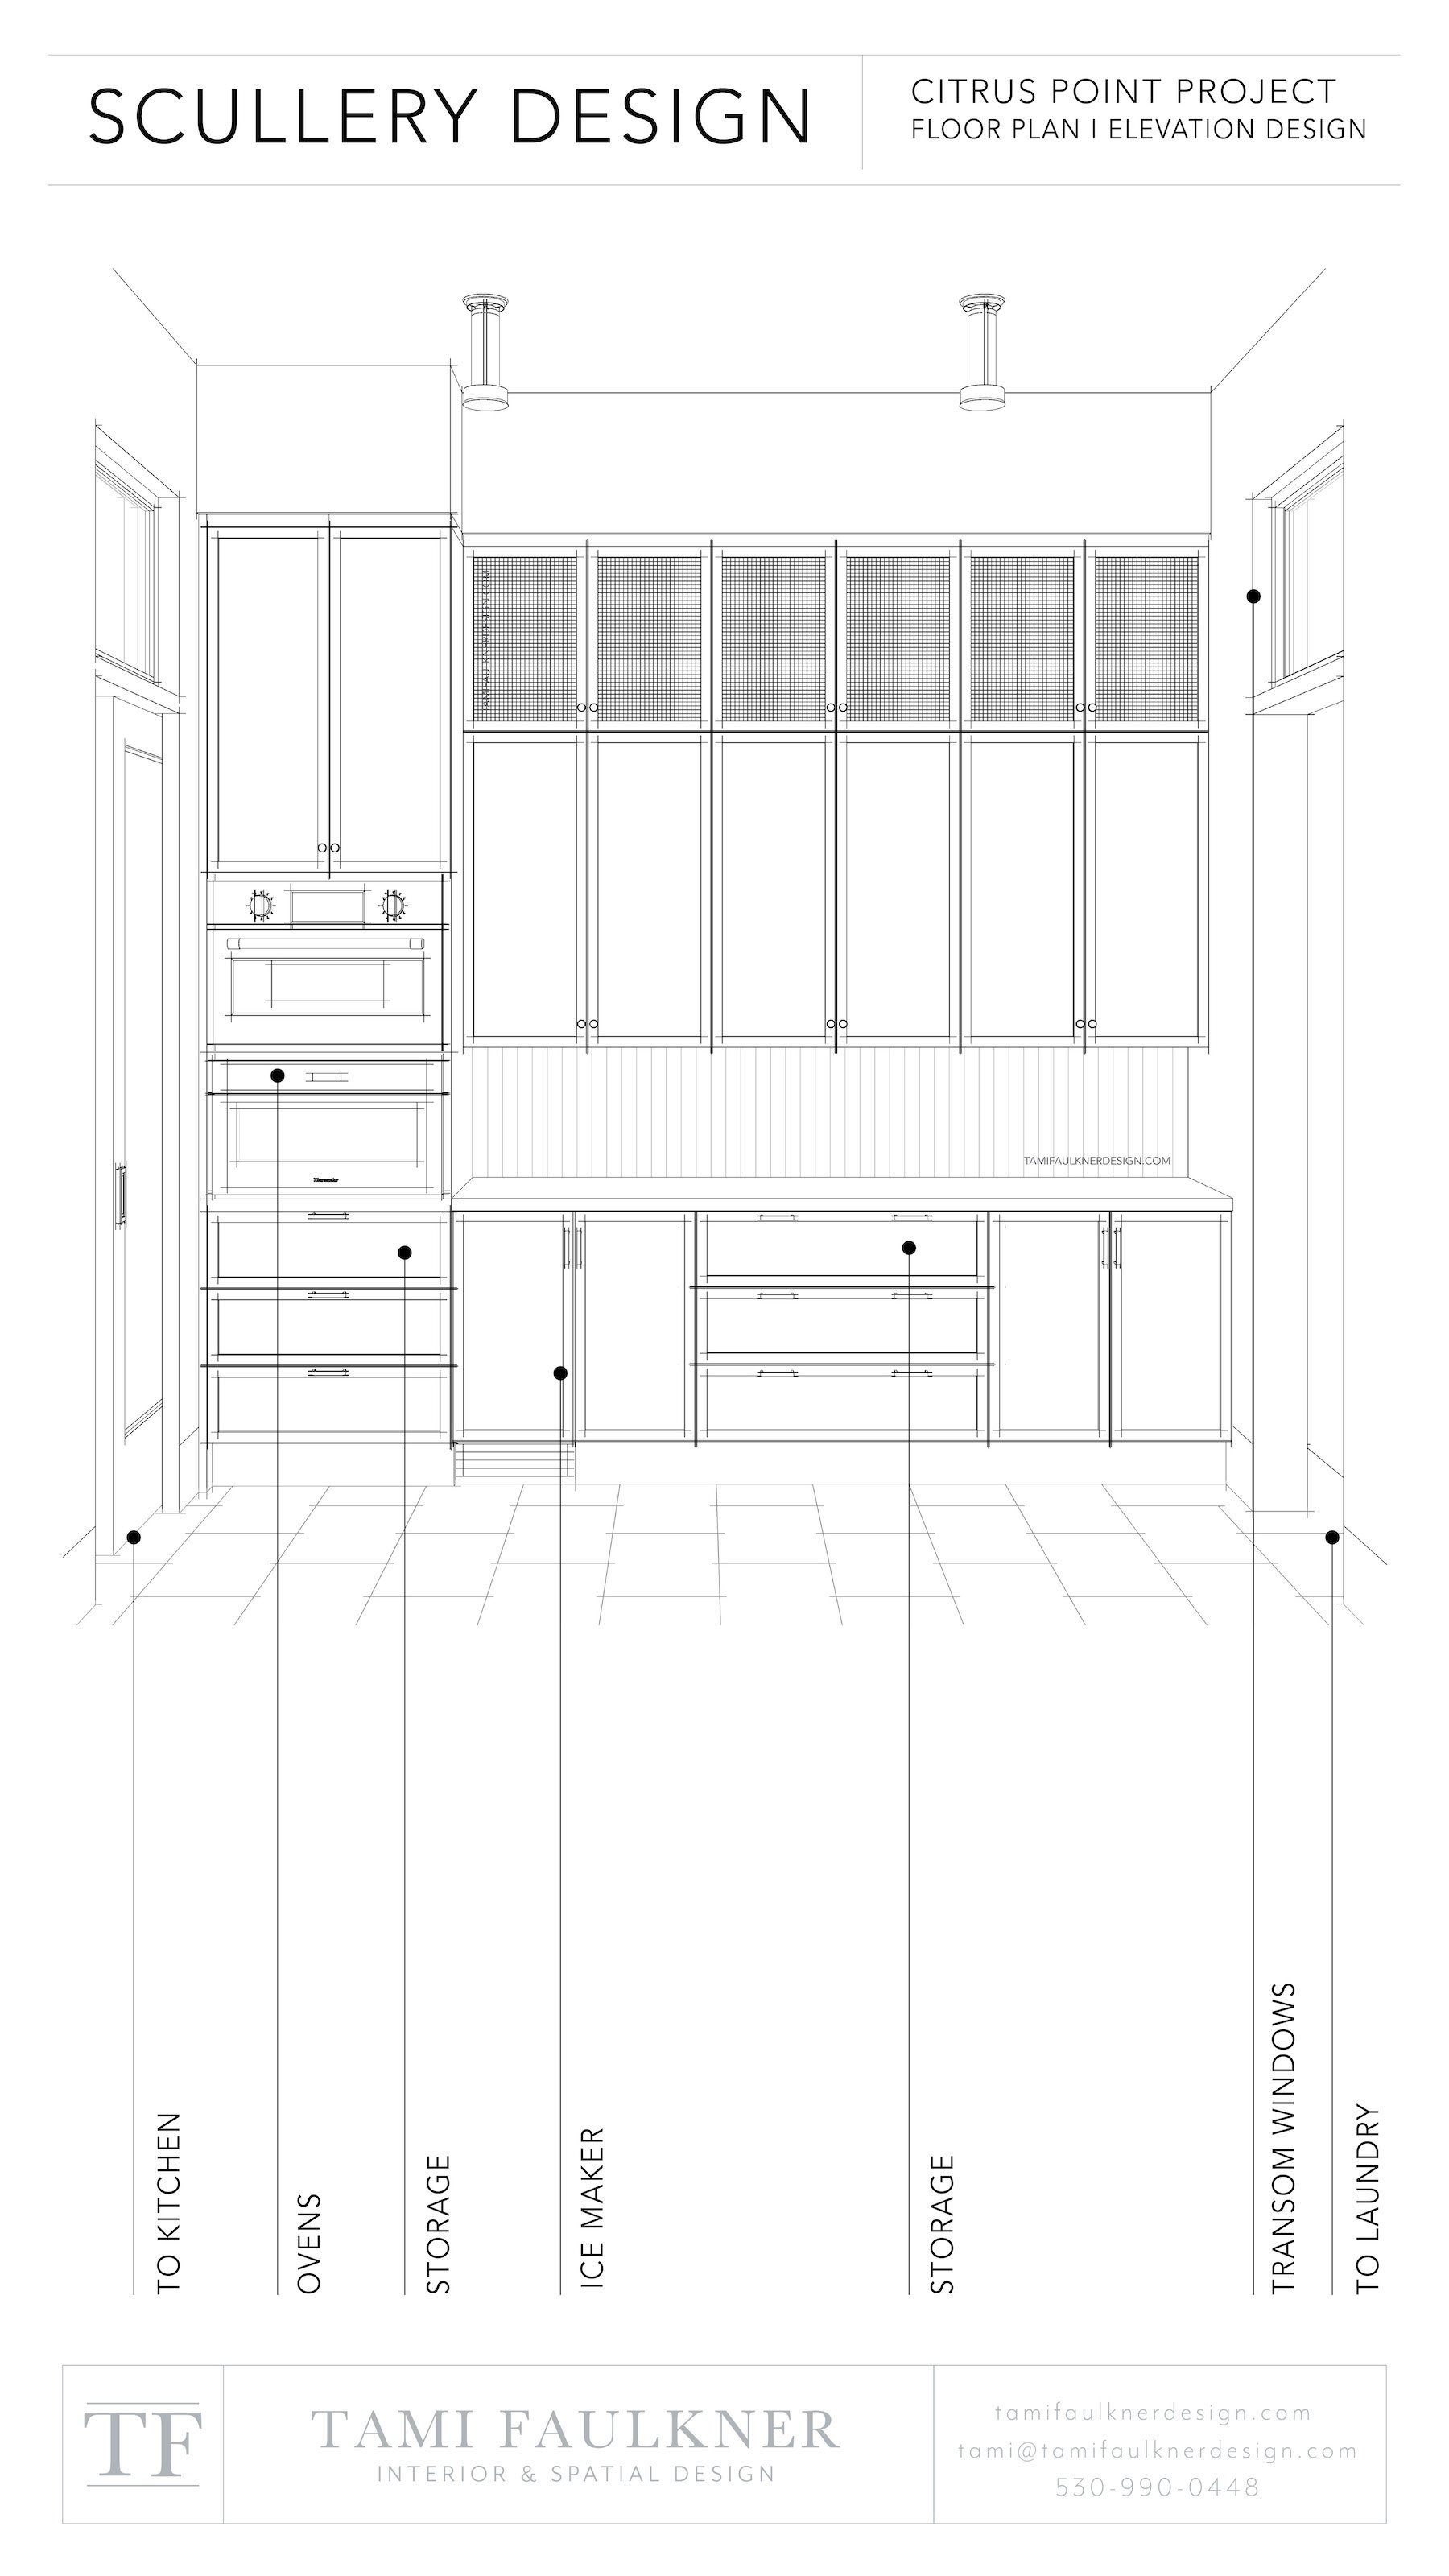 SCULLERY FLOOR PLAN - CREATING ORDER AND INTENTION WITH FRAGMENTED ...